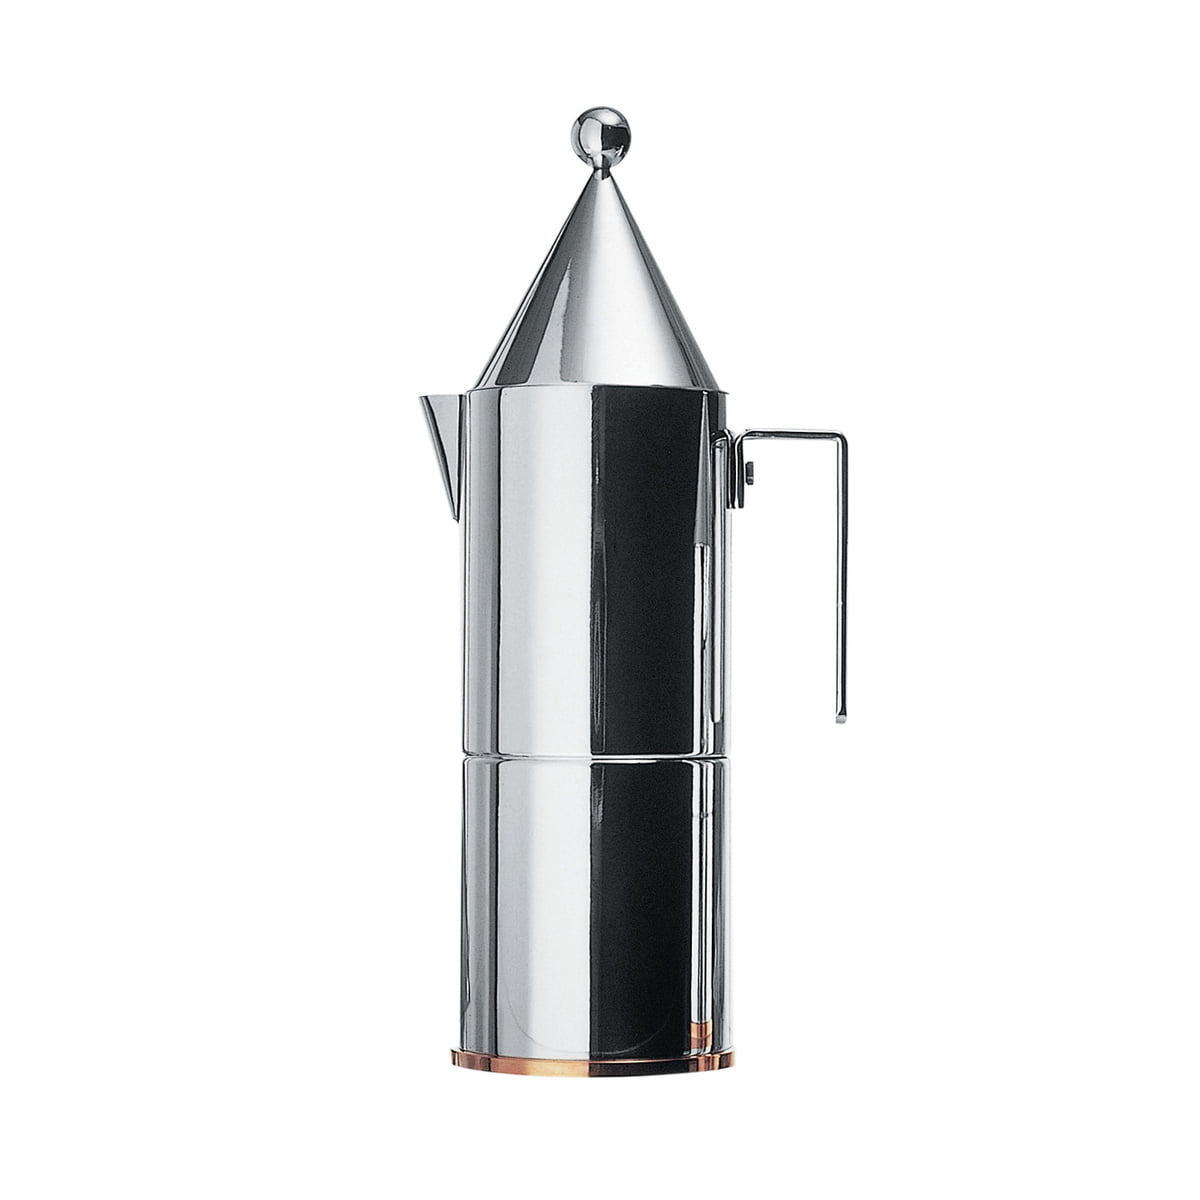 Alessi 9090/M - Design Stovetop Espresso Coffee Maker, 18/10 Stainless  Steel, Mirror Polished, 10 cups